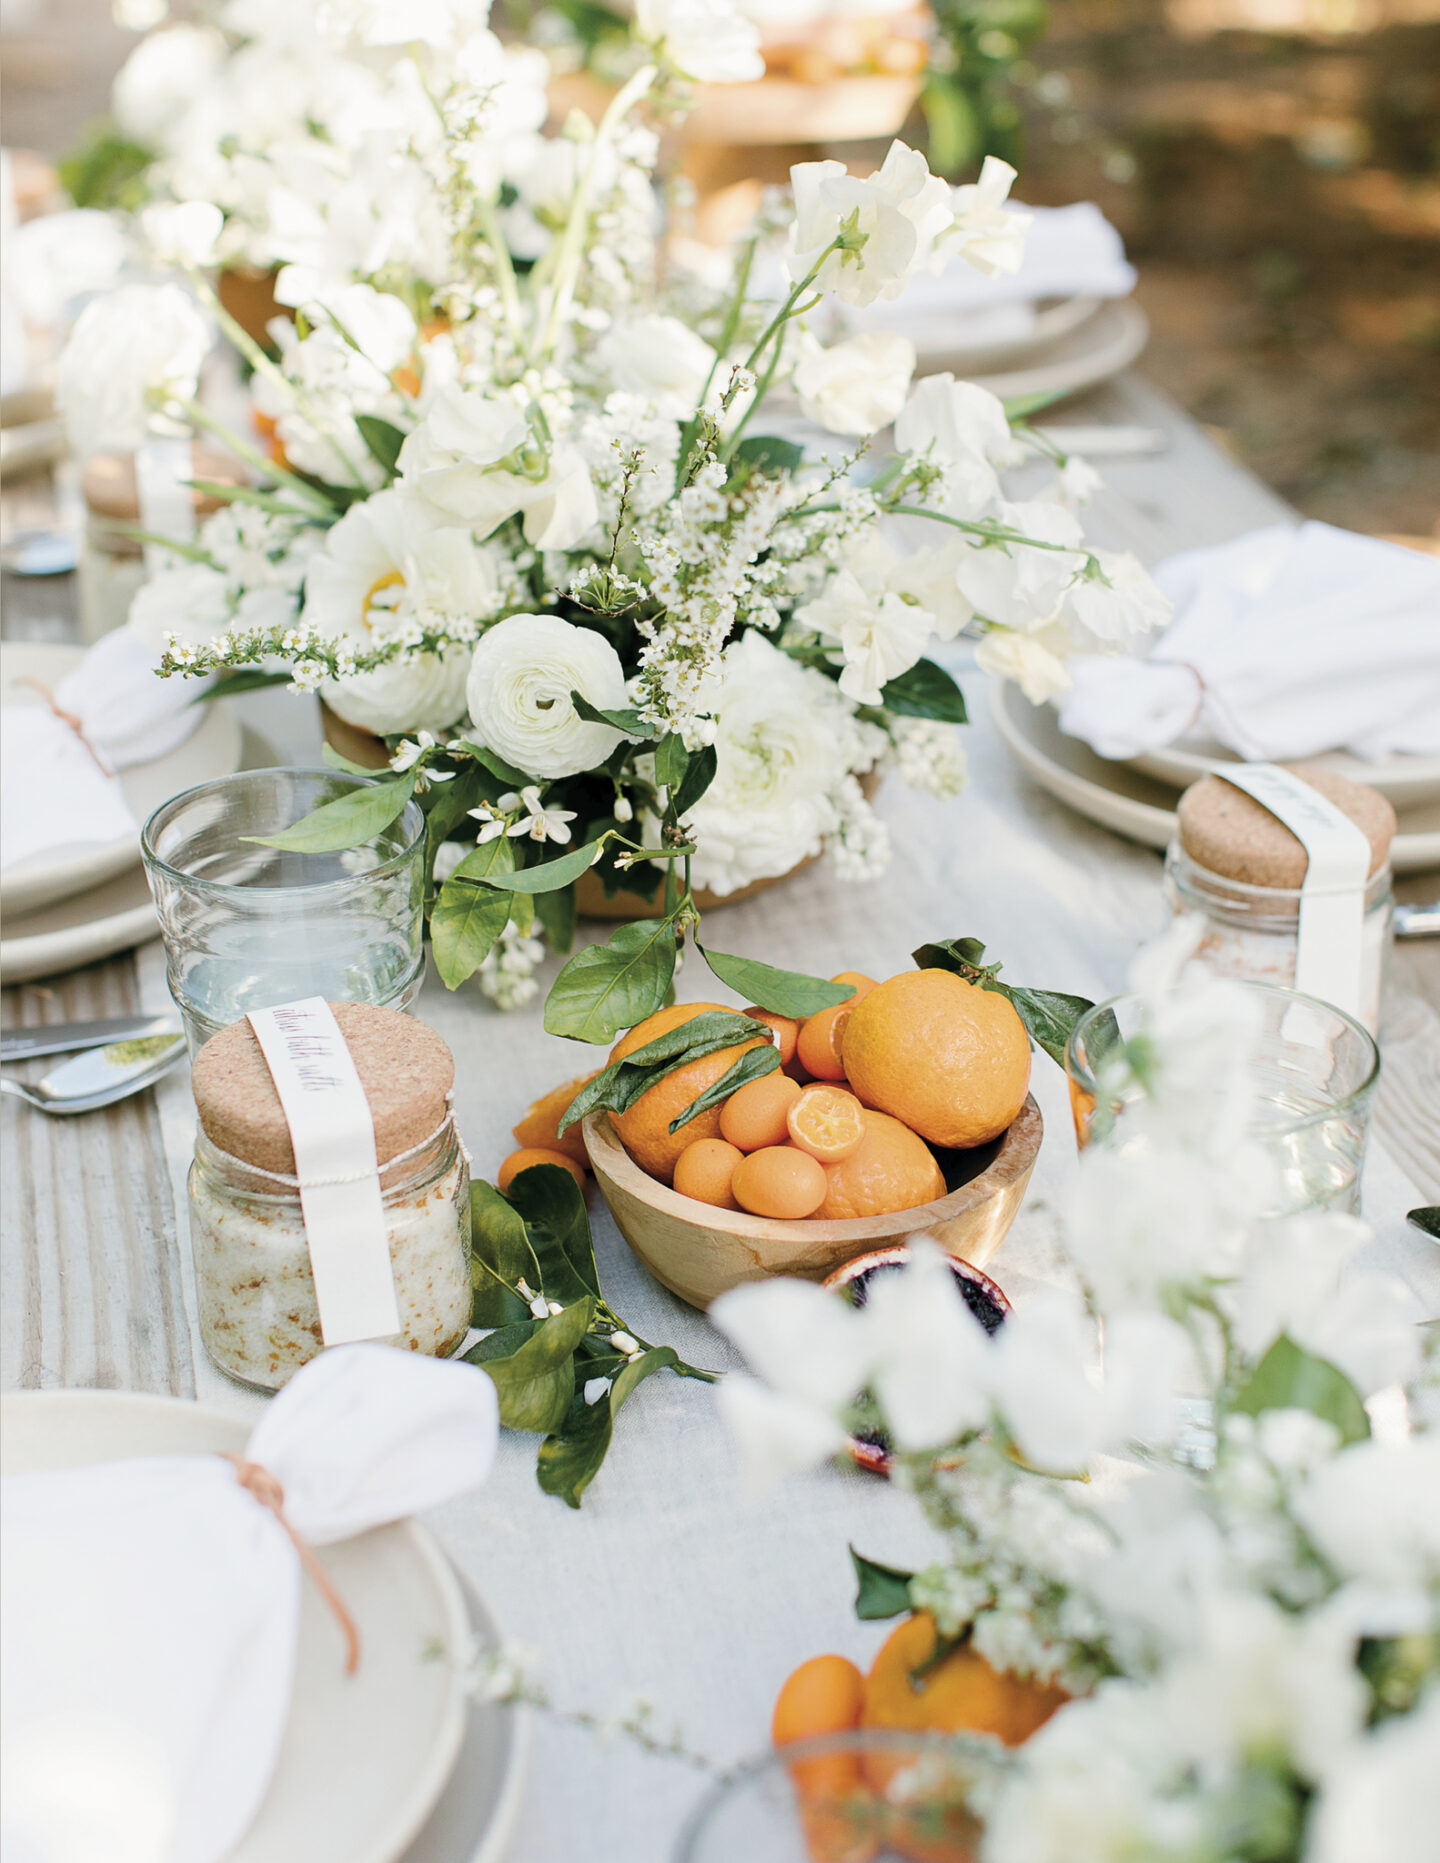 Beautiful outdoor tablescape with earthy organic florals and fruit - Jenni Kayne for PACIFIC NATURAL (Rizzoli, 2019).